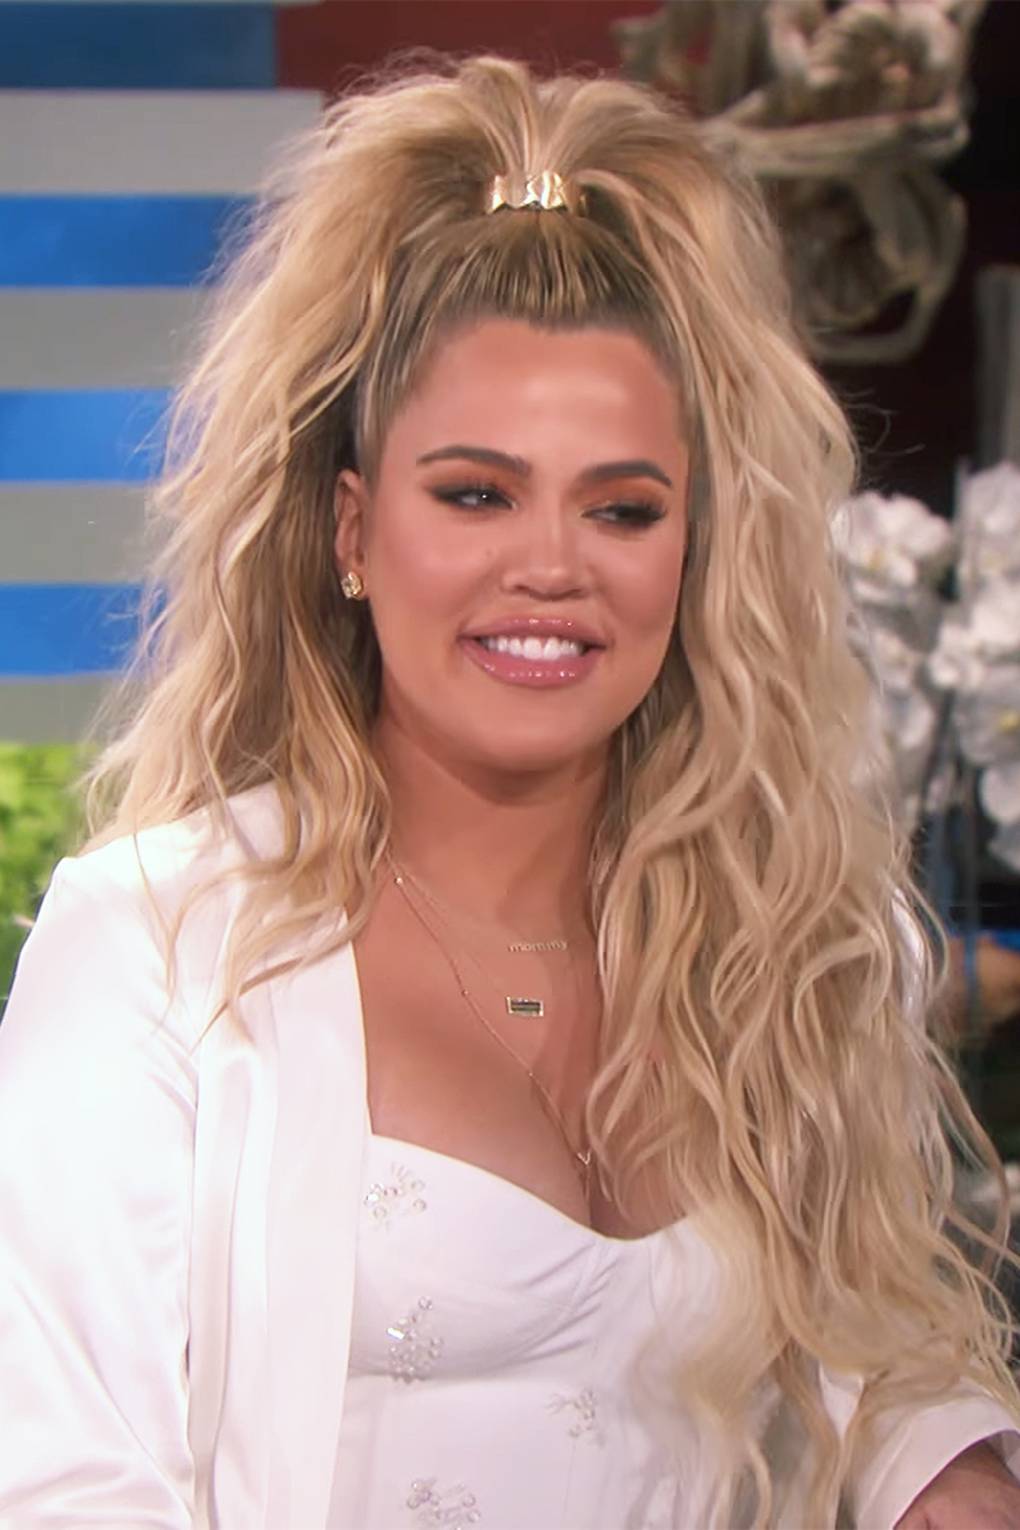 Khloe Kardashian Opens Up About Her Unhealthy Relationship With